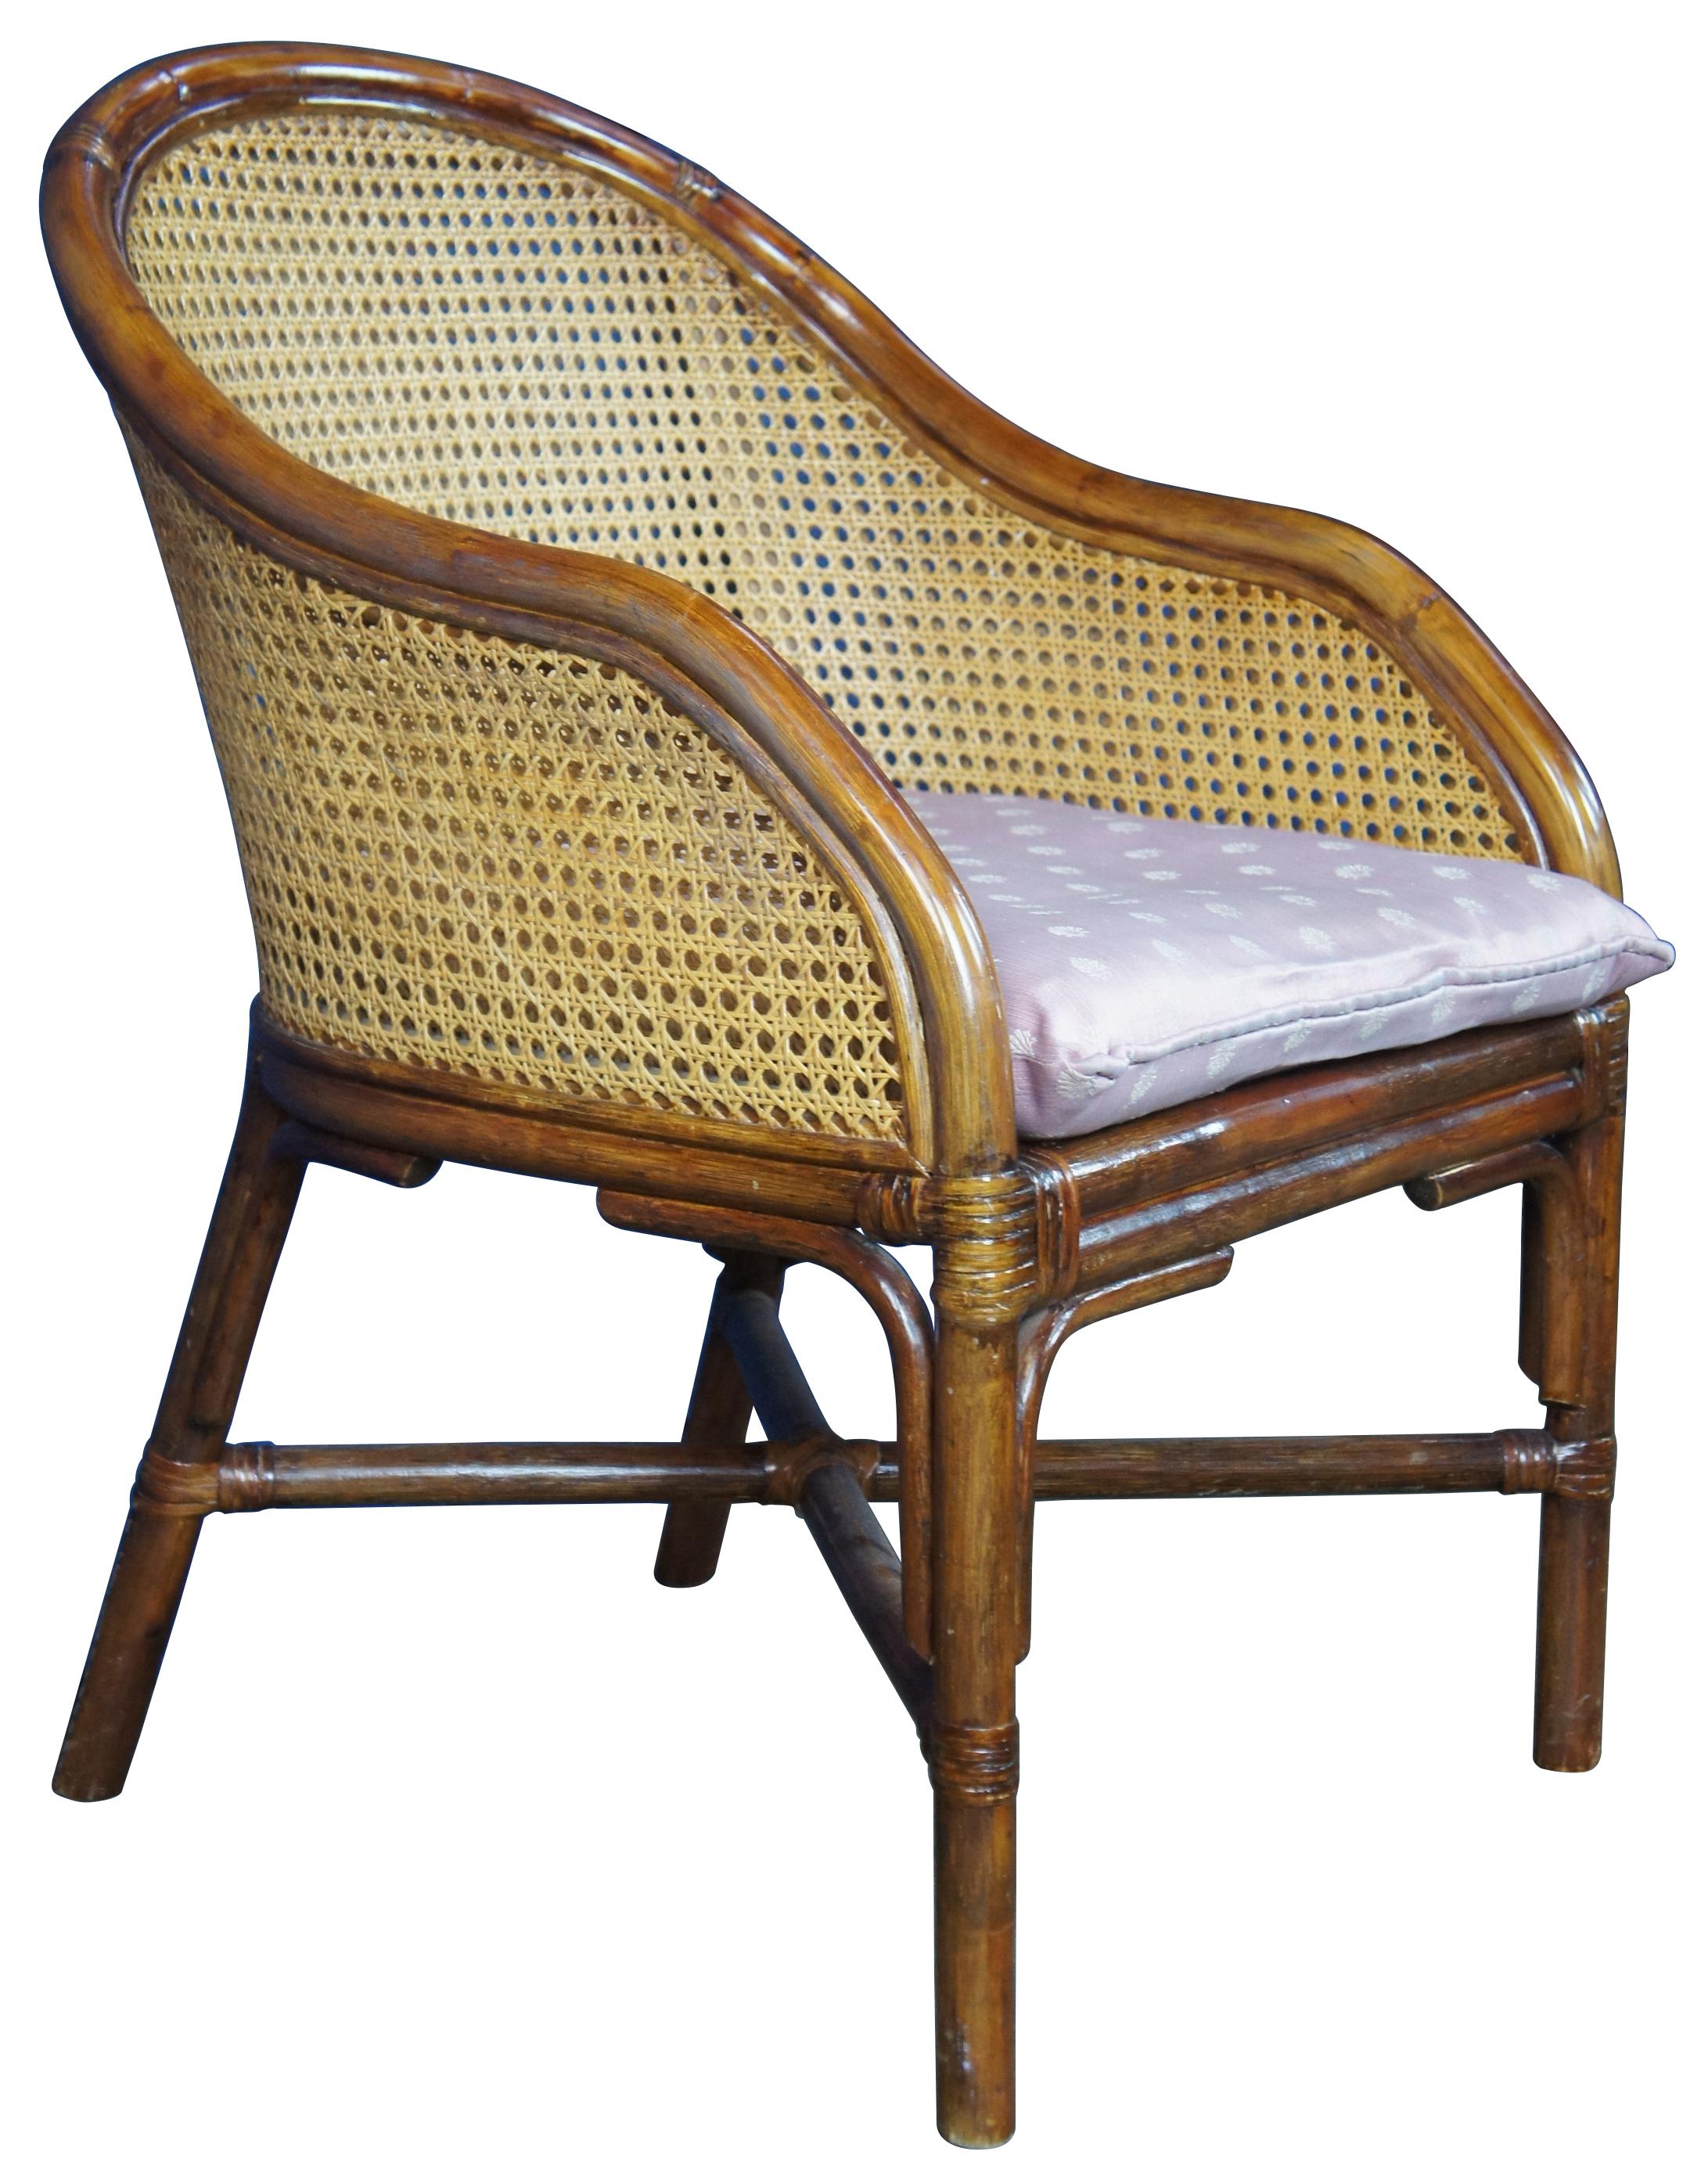 Vintage French bergere club or lounge chair. Made of bamboo and rattan featuring round double caned back with sloped arms supported by legs connected with X base.
   